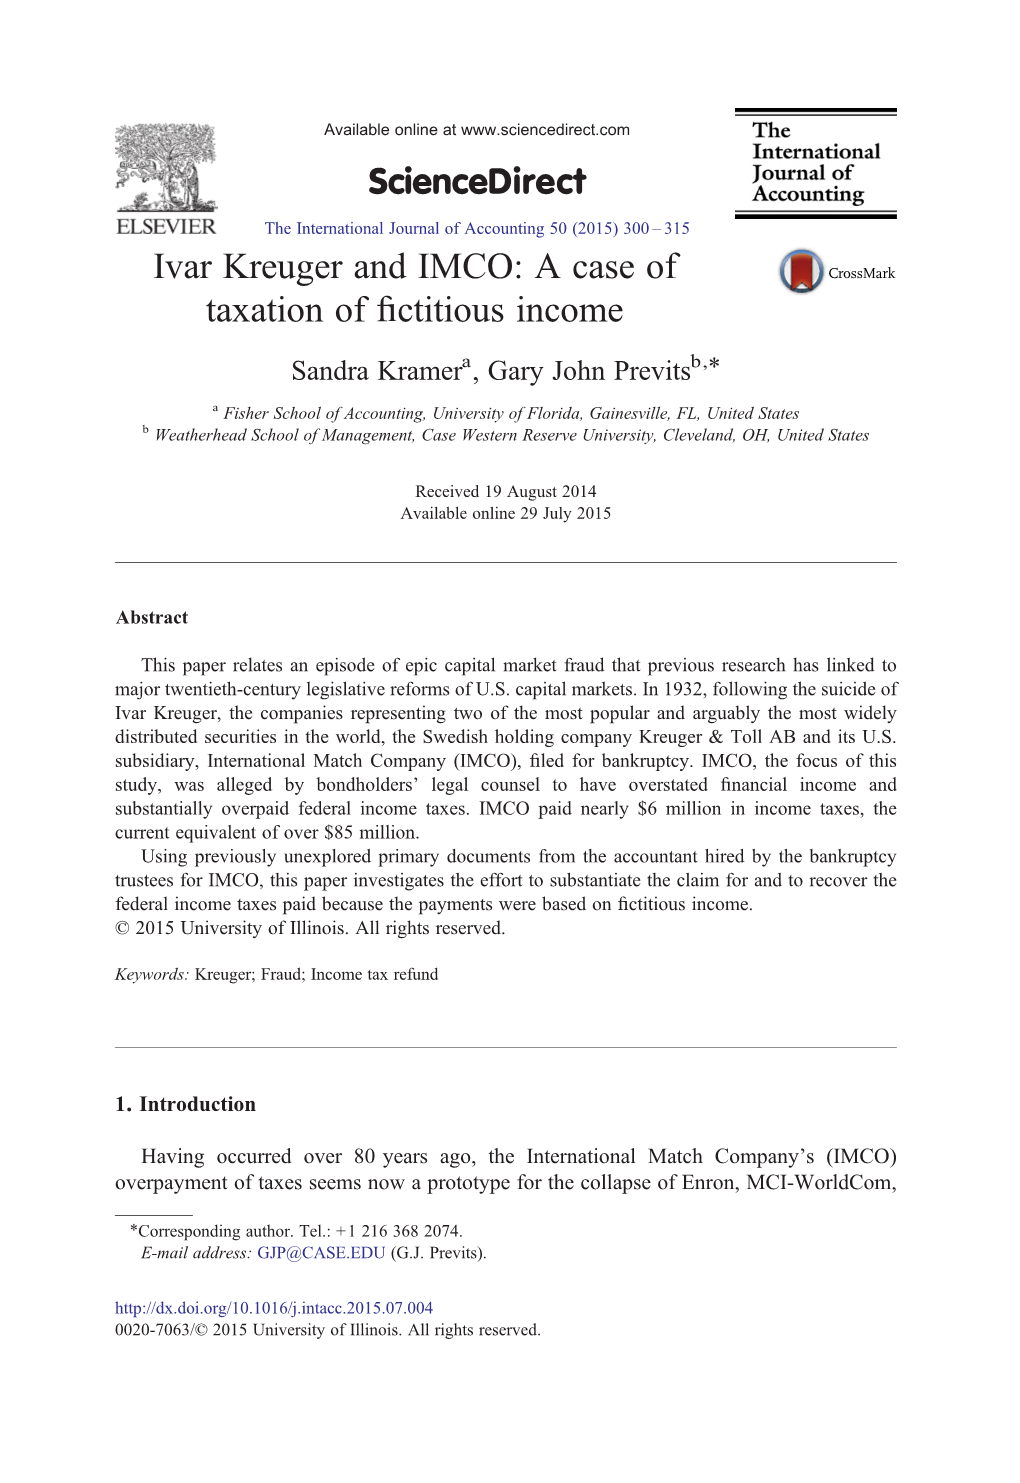 Ivar Kreuger and IMCO: a Case of Taxation of Fictitious Income